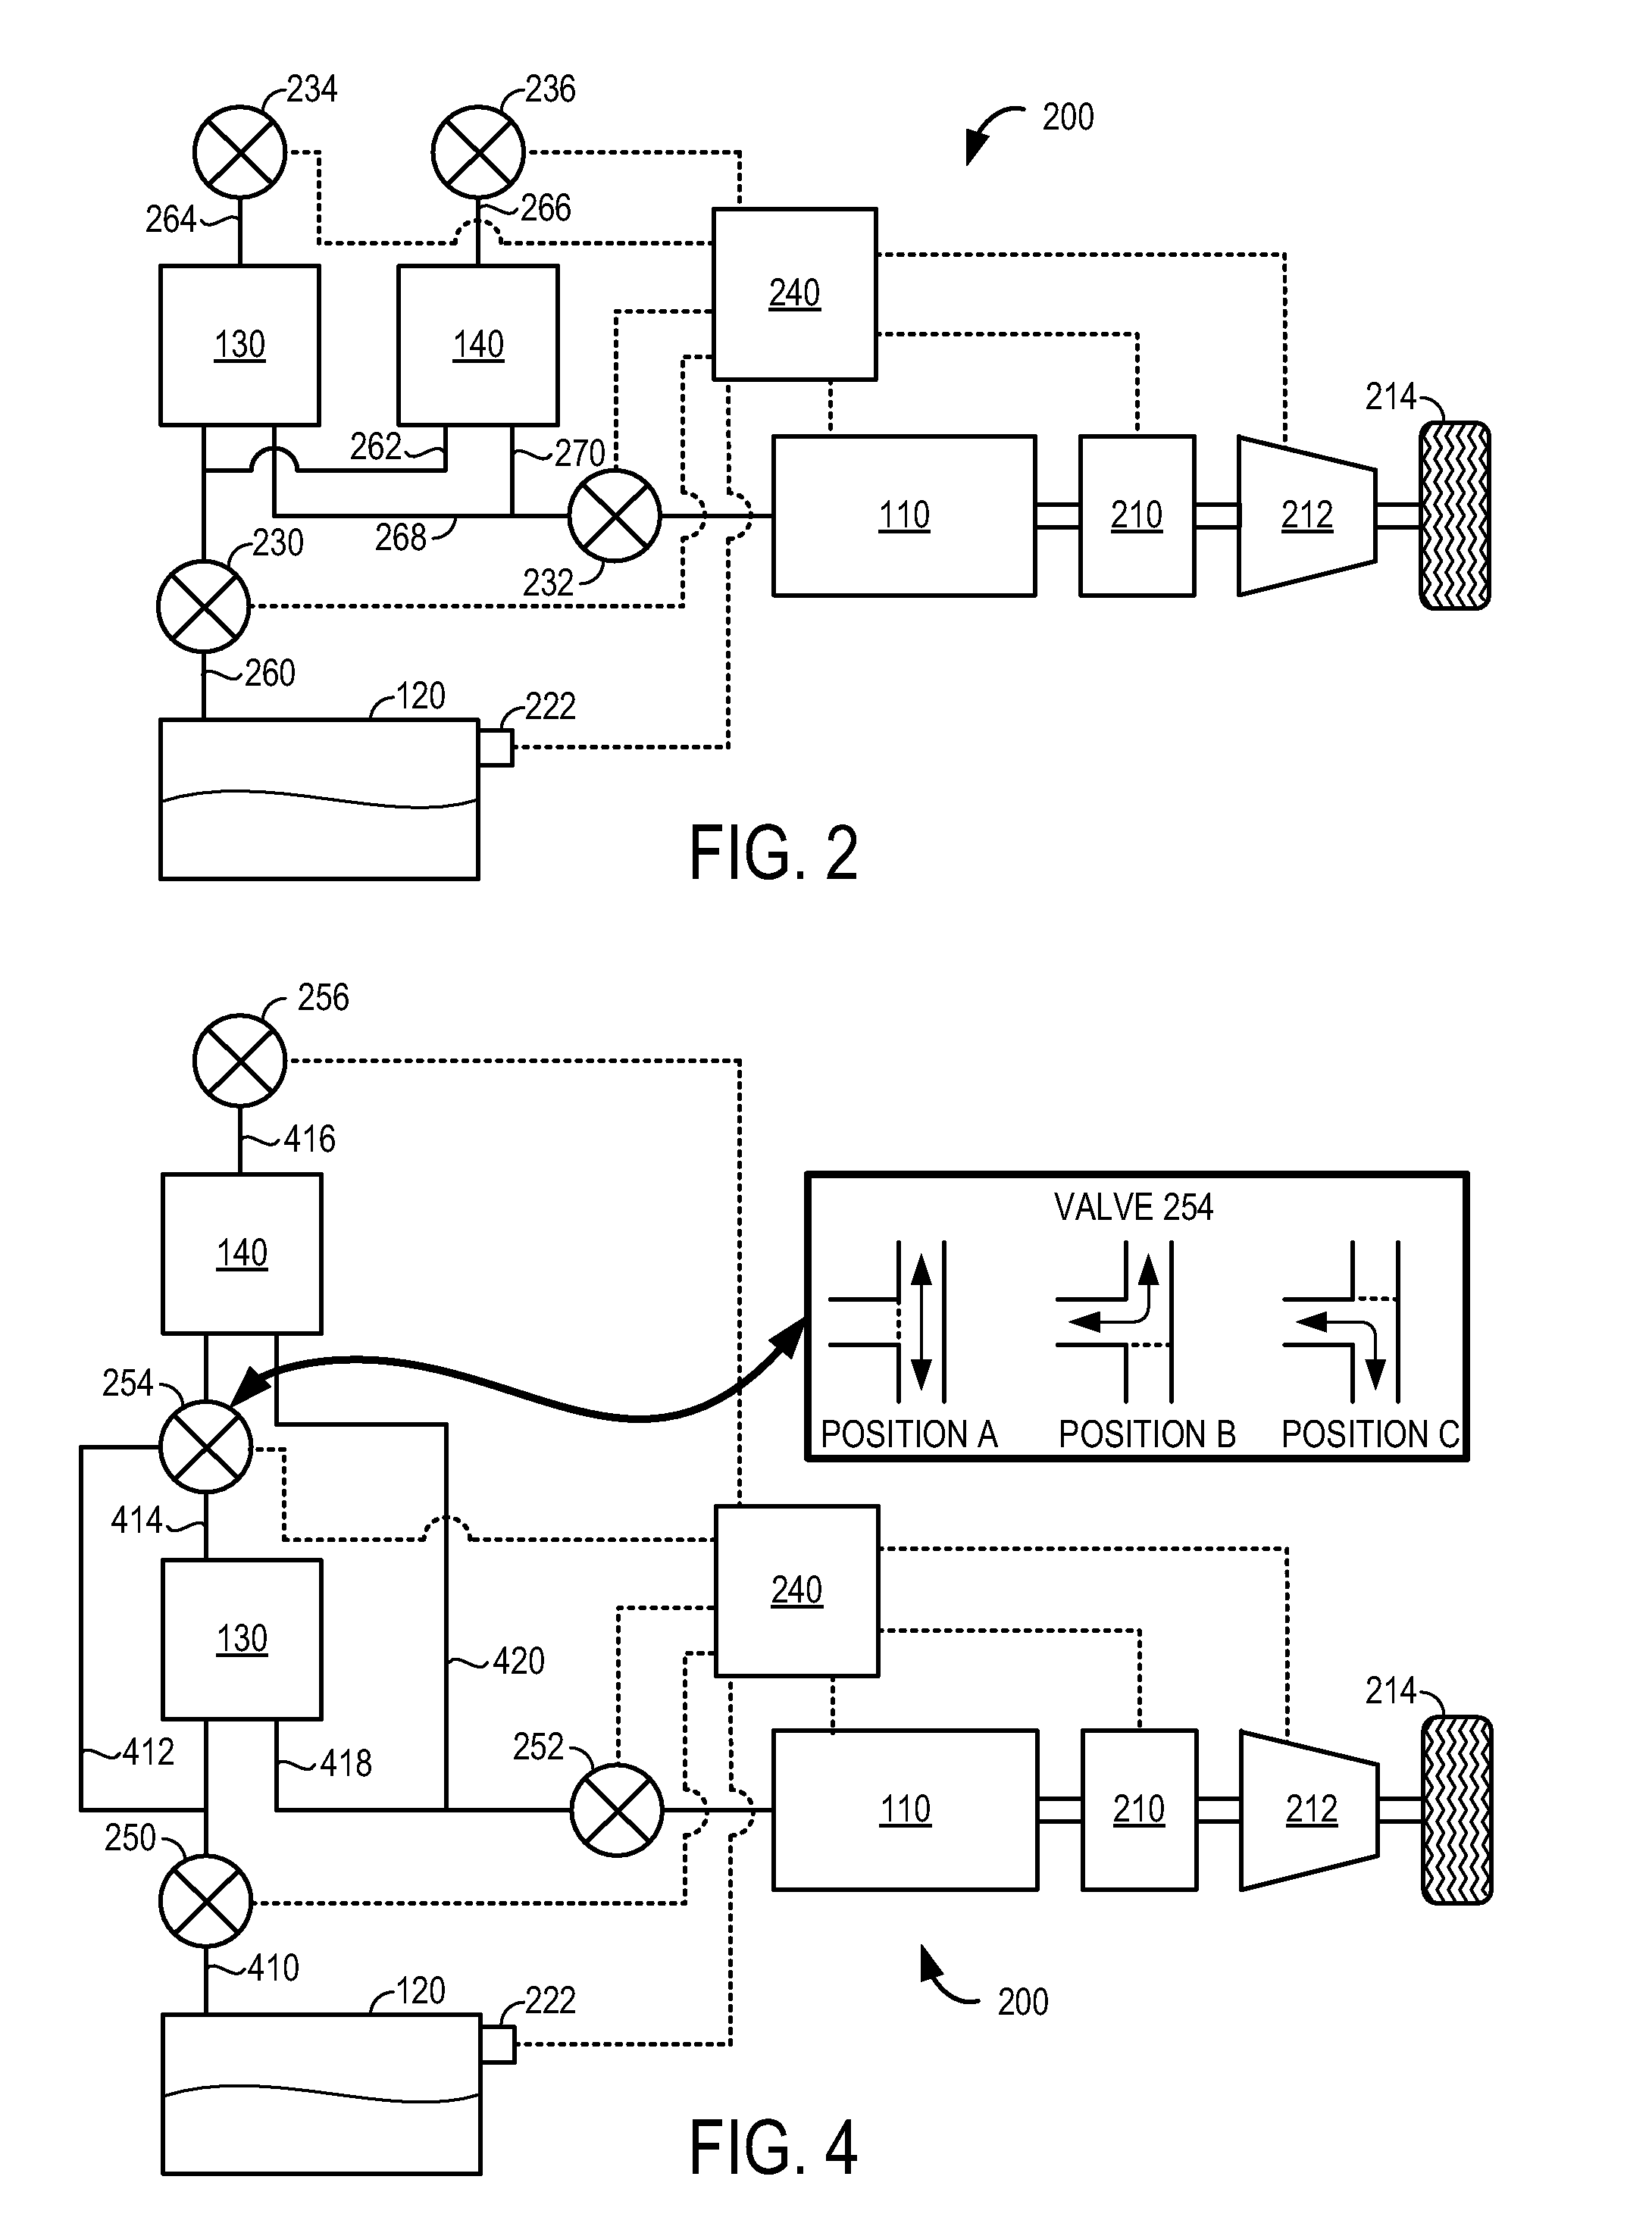 Multi-path evaporative purge system for fuel combusting engine